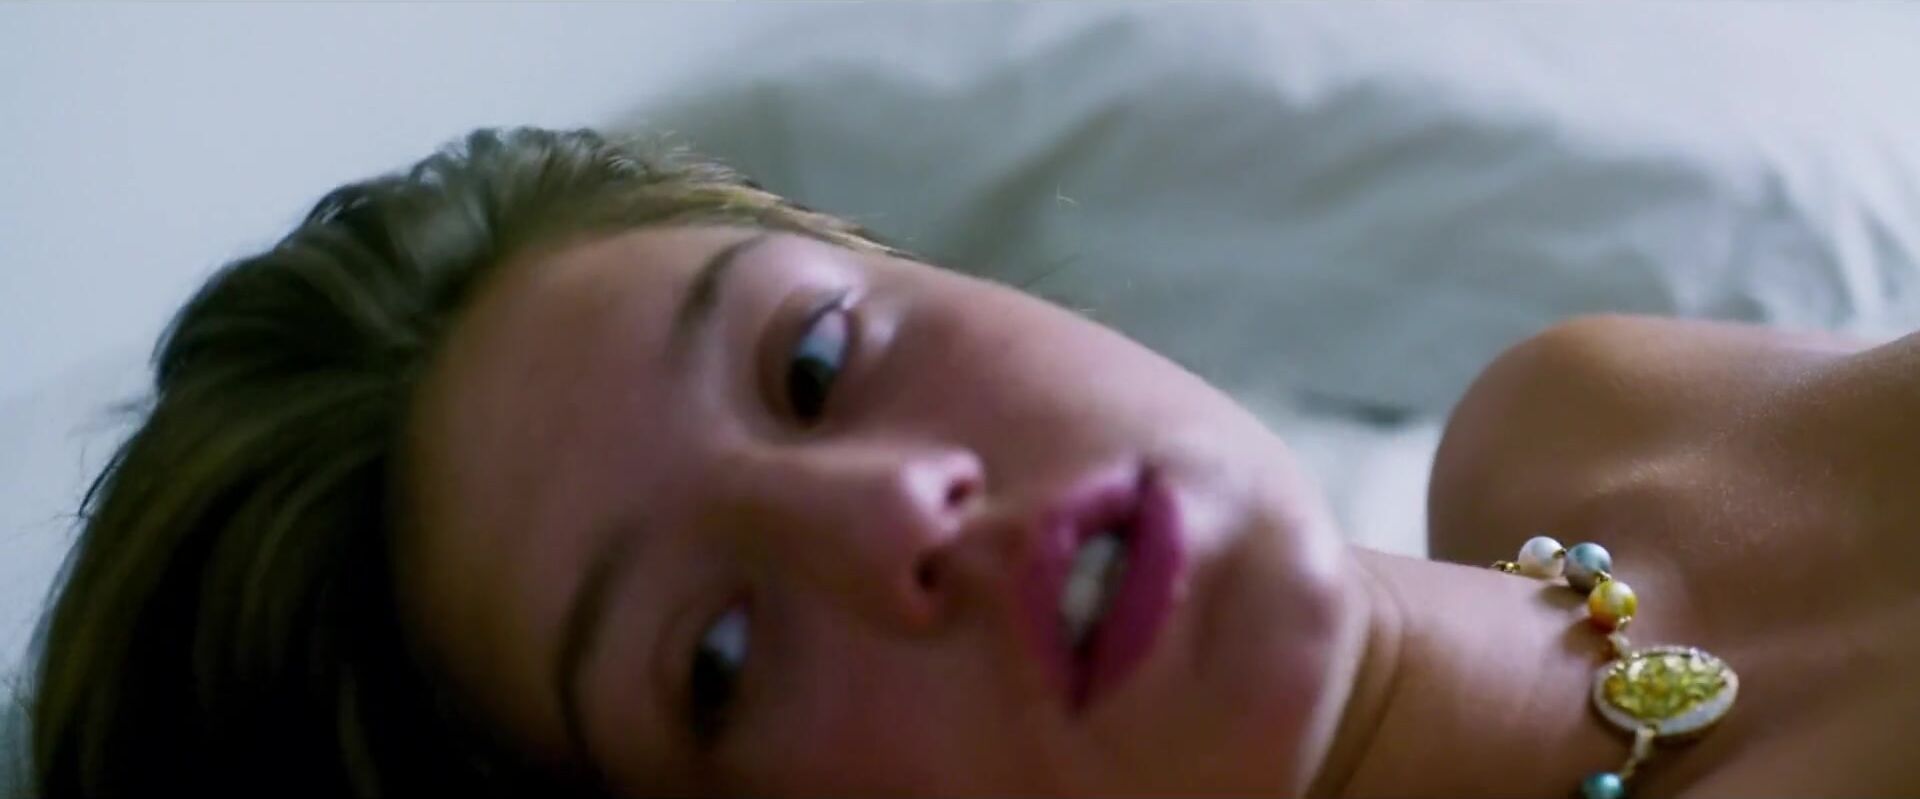 Coed Adele Exarchopoulos and other French girls naked fool around in Orpheline (2016) GamesRevenue